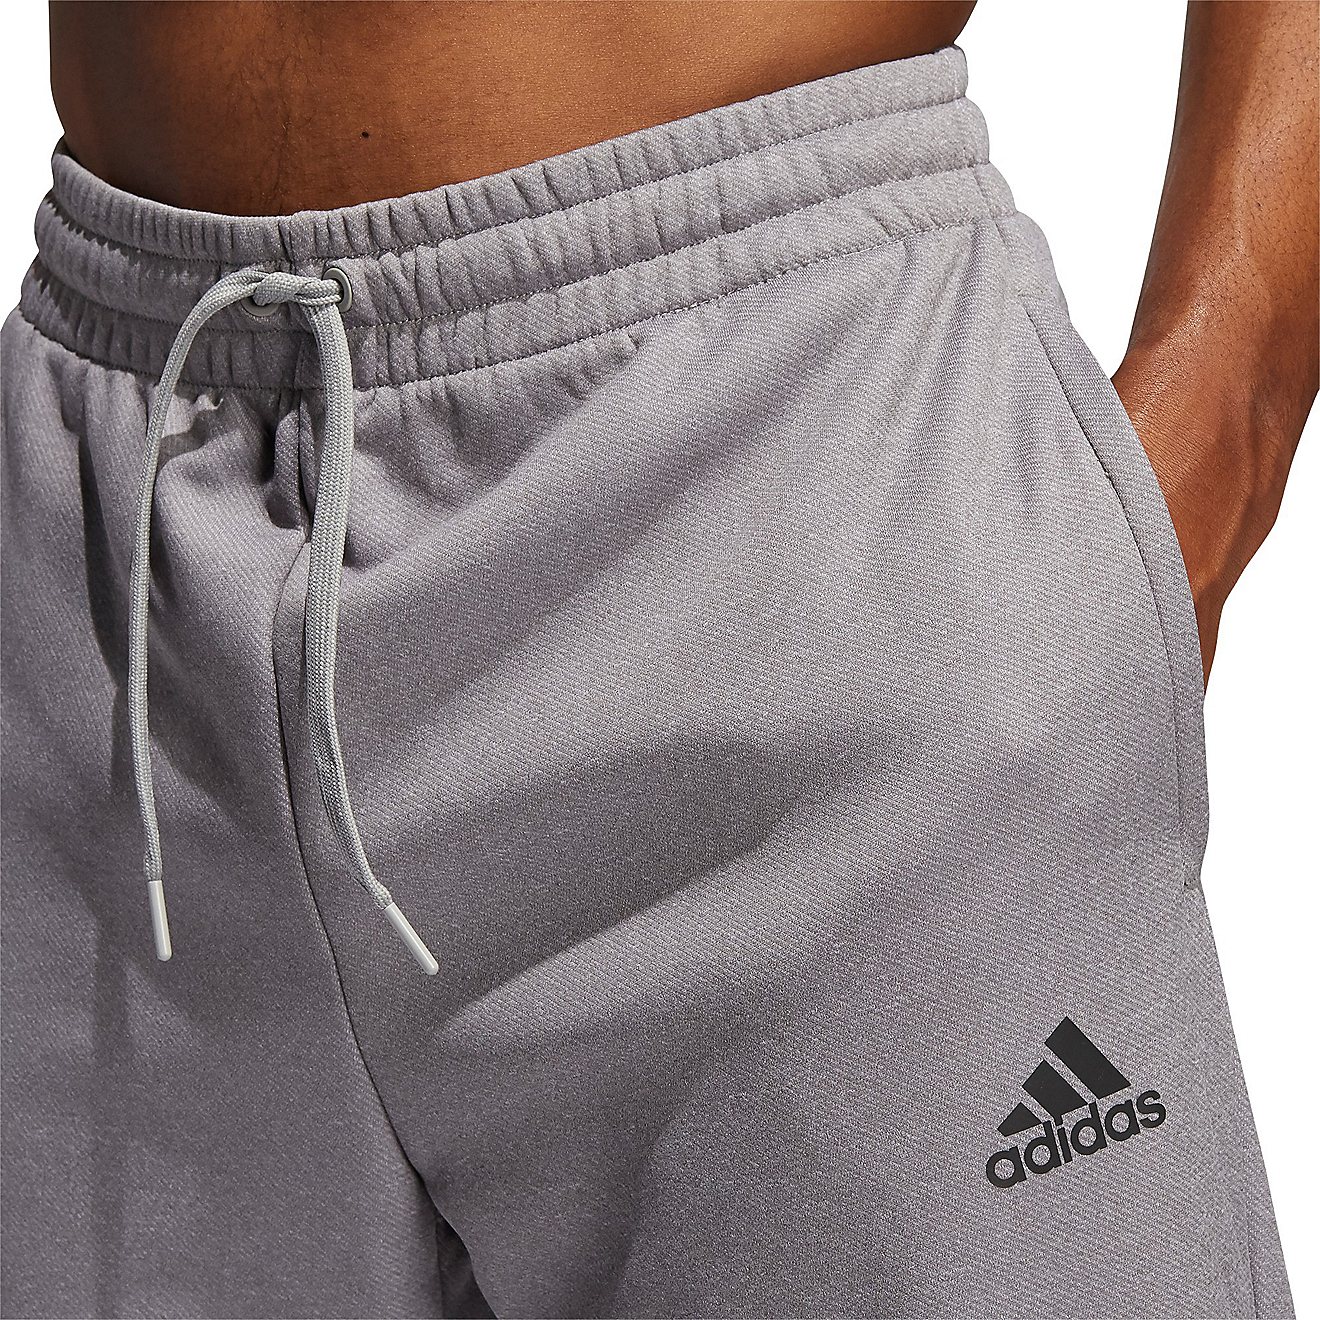 adidas Men's Team Issue Open Sweatpants                                                                                          - view number 4